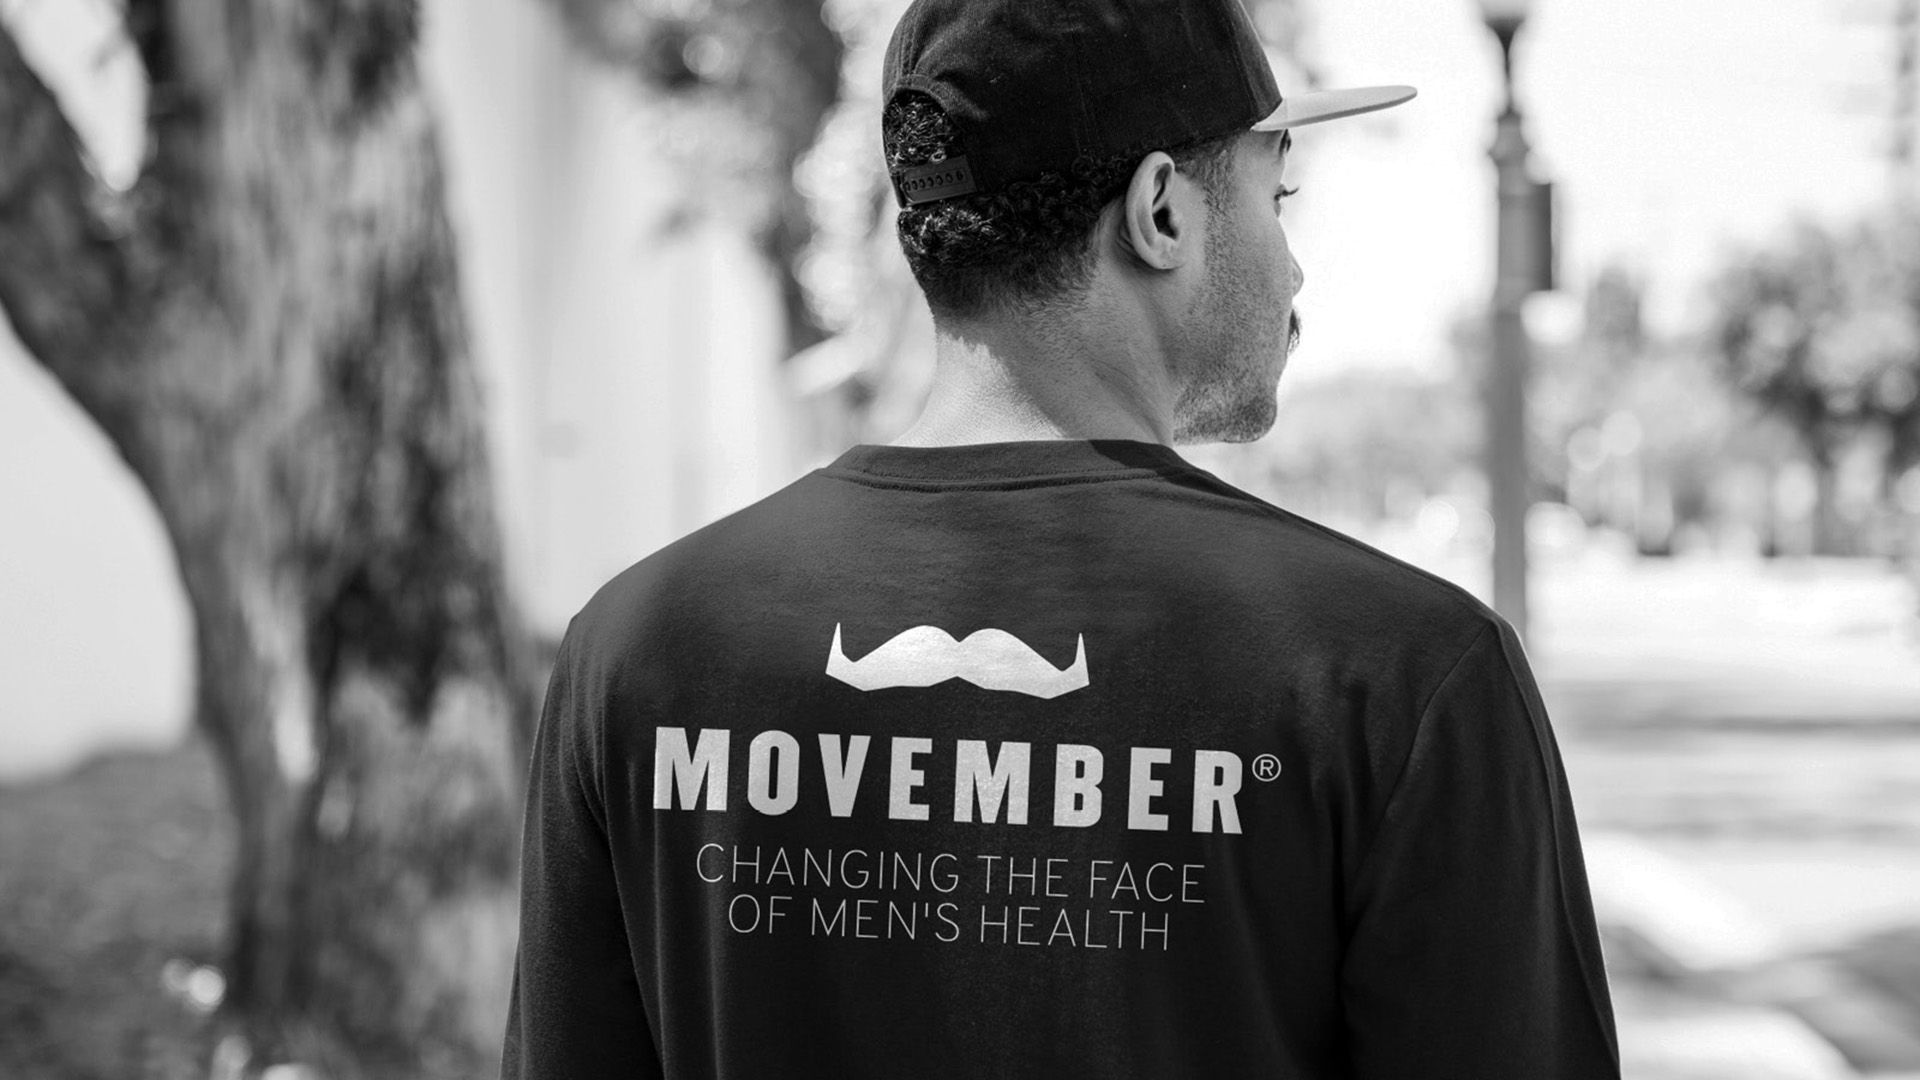 Black and white photo of a man sporting stylish Movember merchandise. The photo shows the back of the man's t-shirt, which bears large white letters that say: "Movember. Changing the face of men's health"